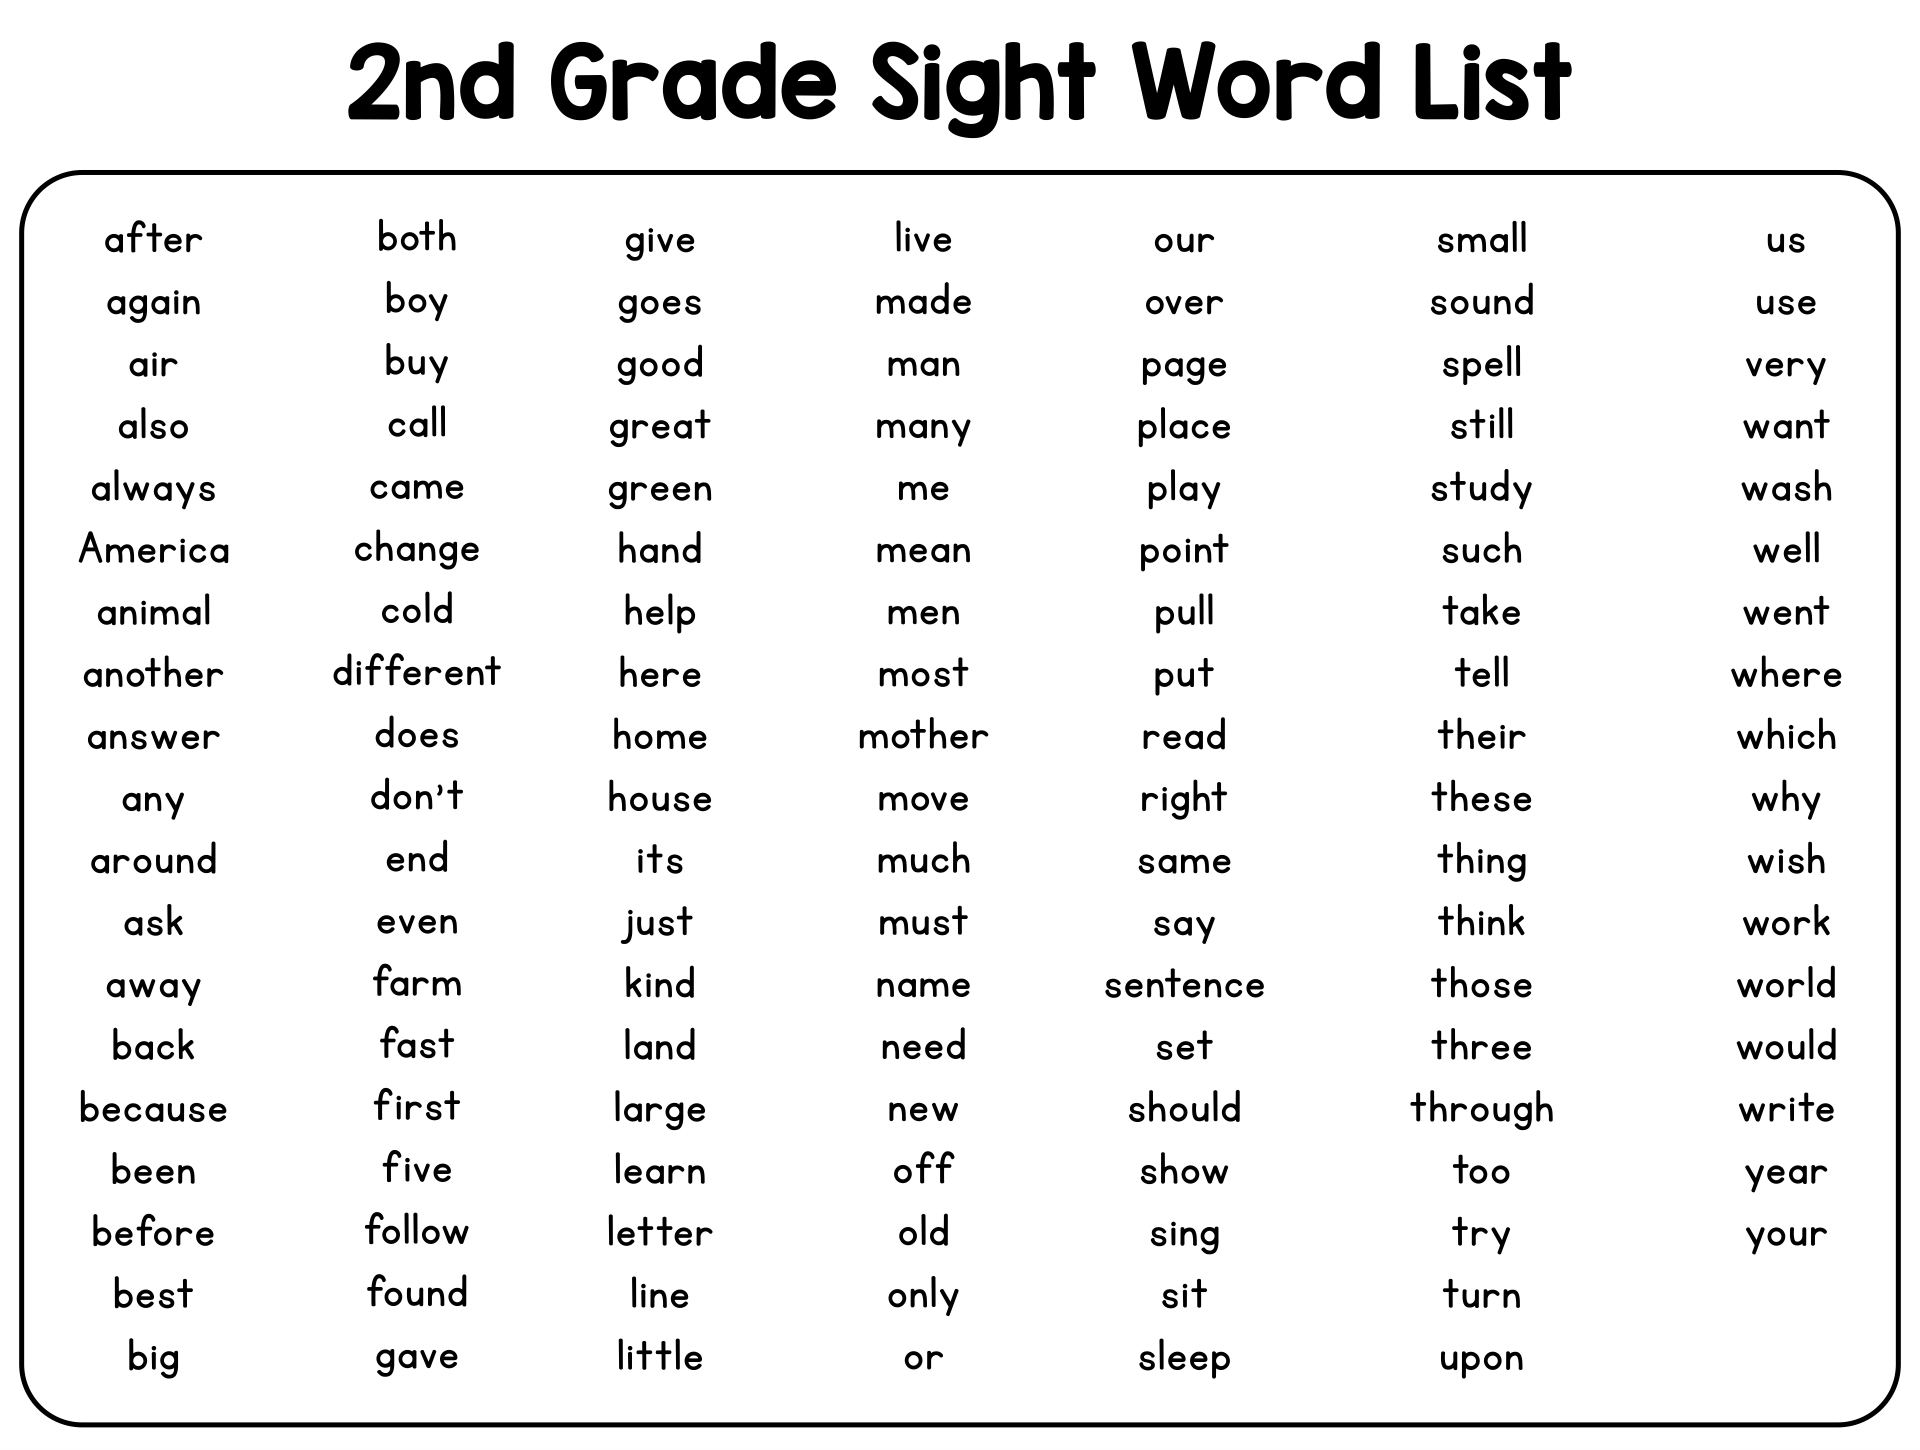 printable-dolch-word-lists-sight-word-worksheets-2nd-grade-spelling-words-spelling-words-list